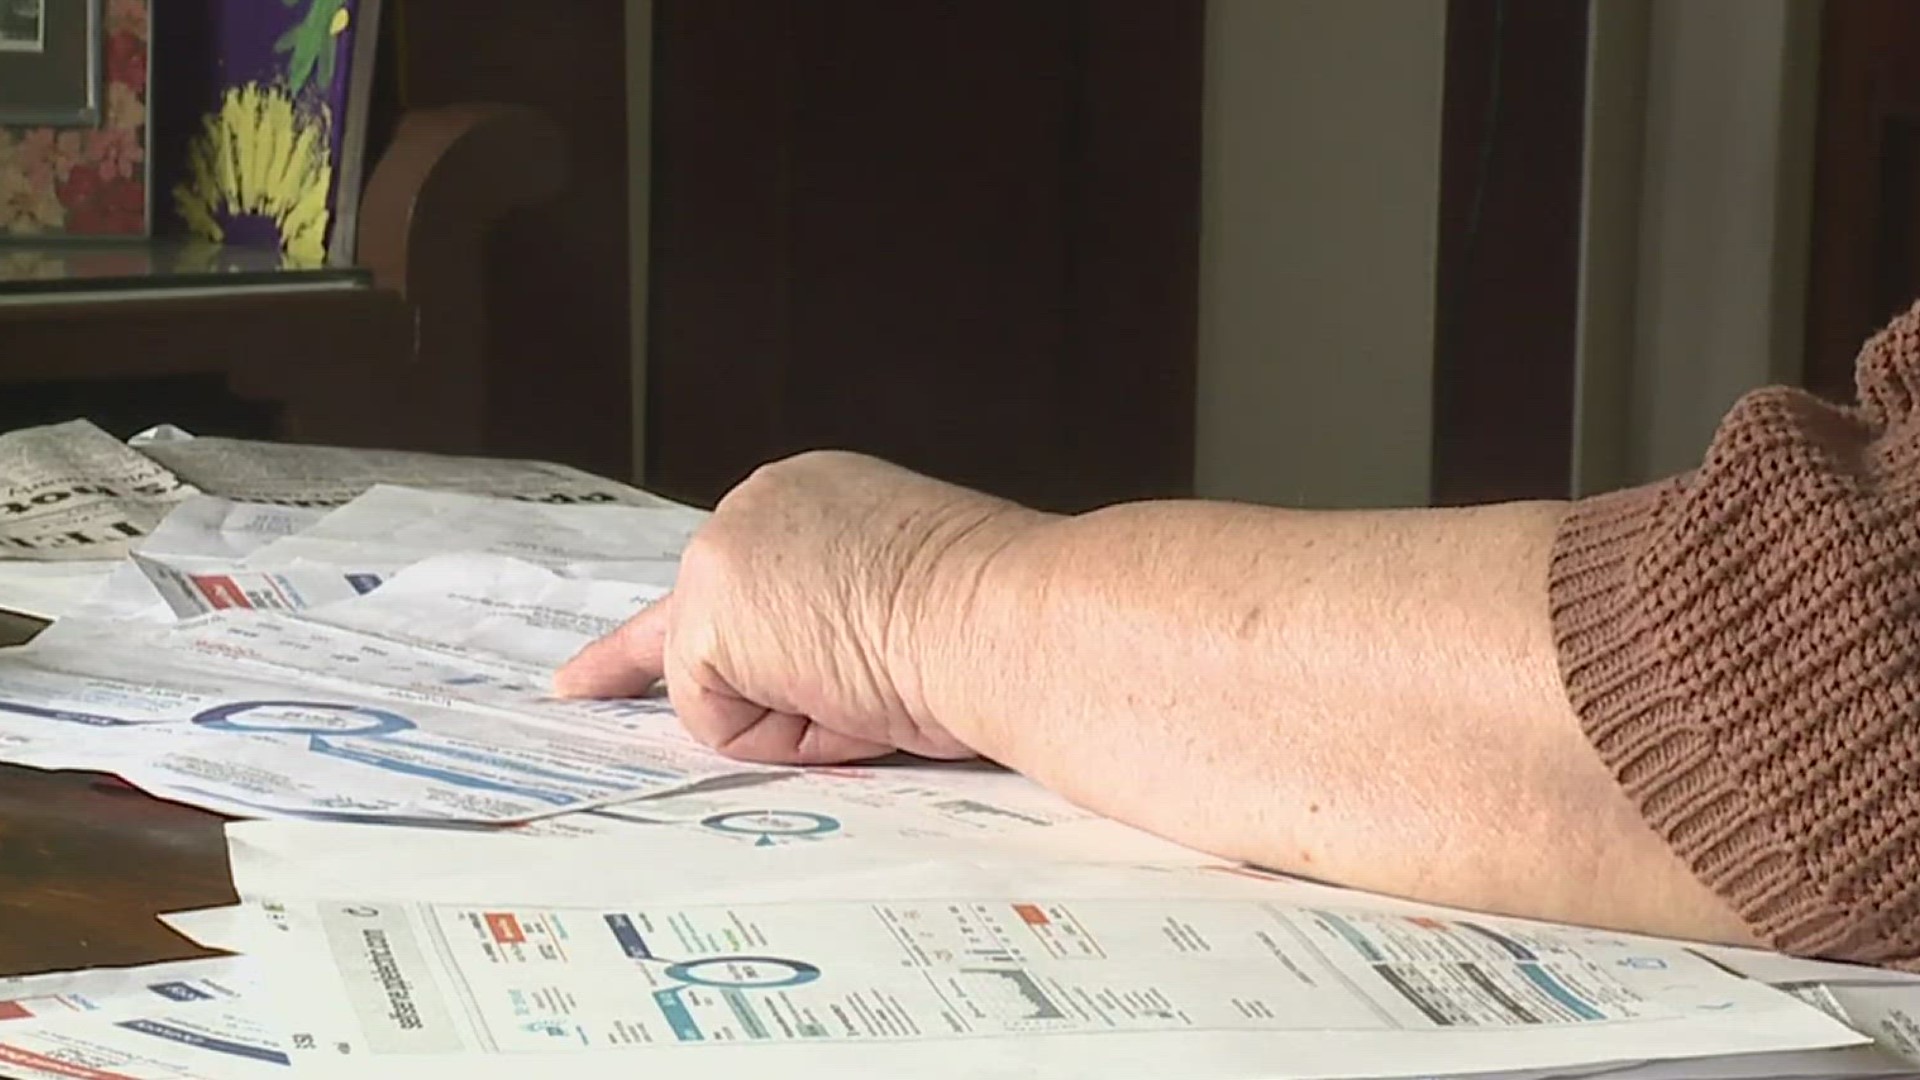 Not just inaccurate but impossible – that's how some in our area describe their PPL electric bills. Newswatch 16's Elizabeth Worthington has been looking into this.